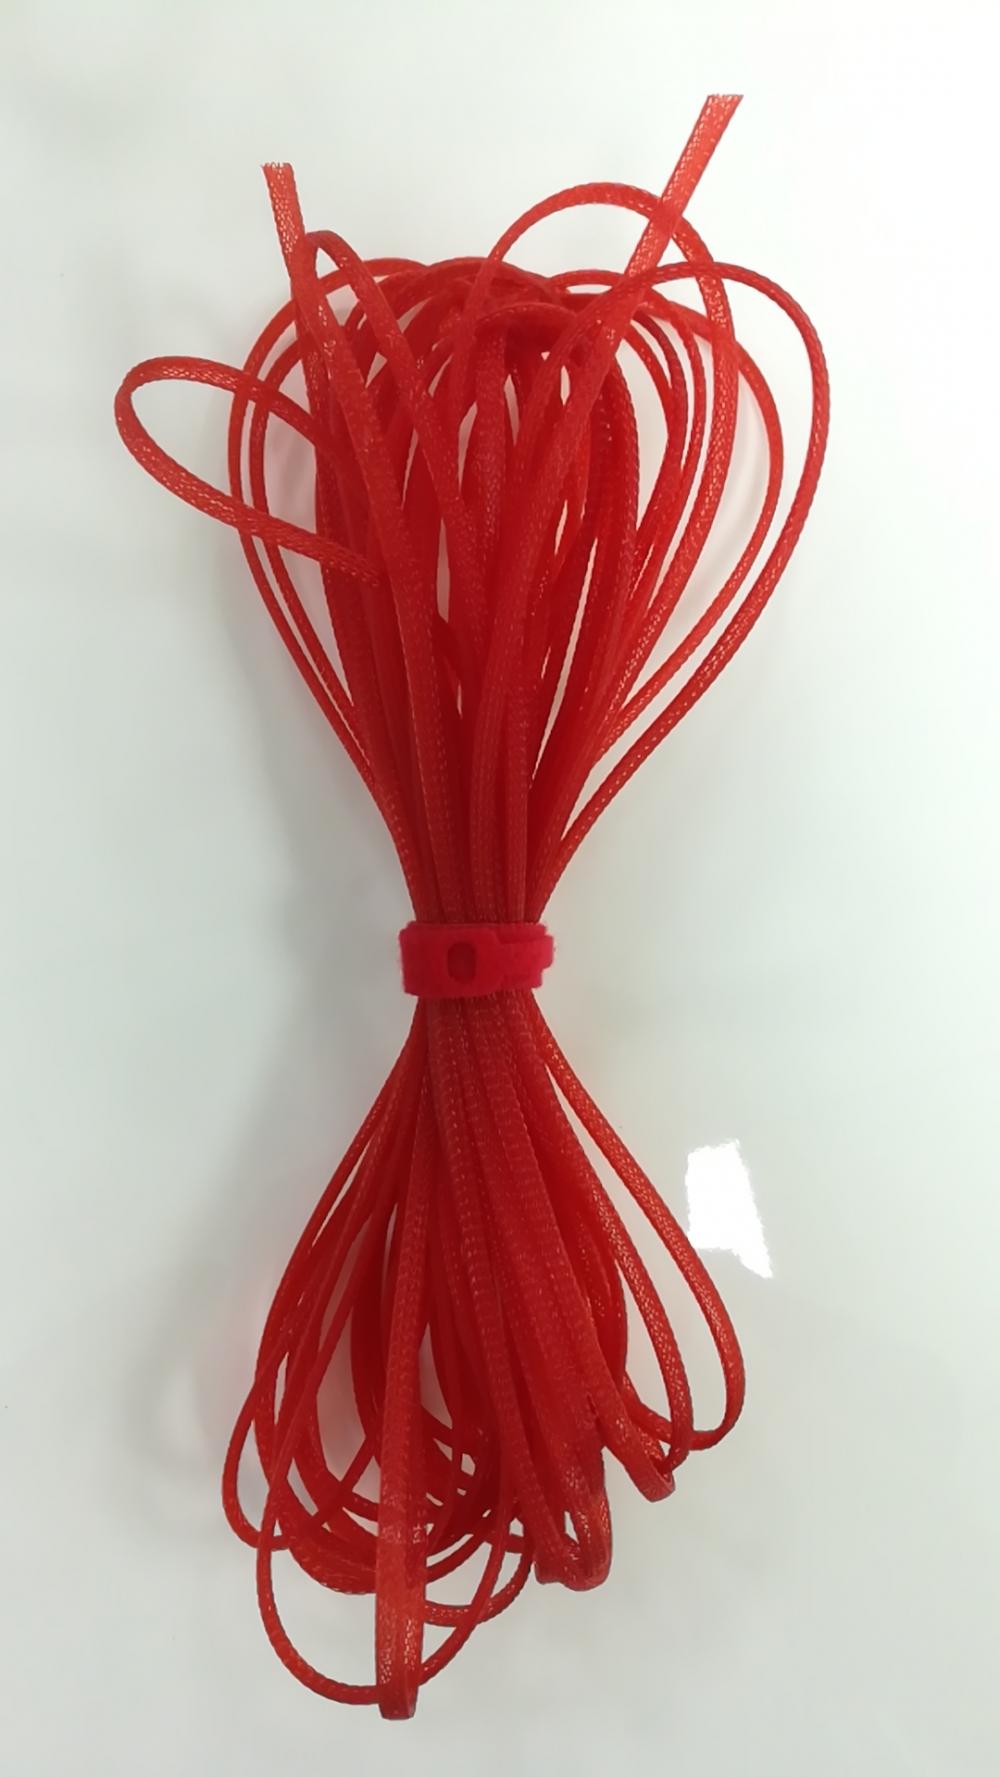 Braided Sleeving For Wire Cables and Hoses